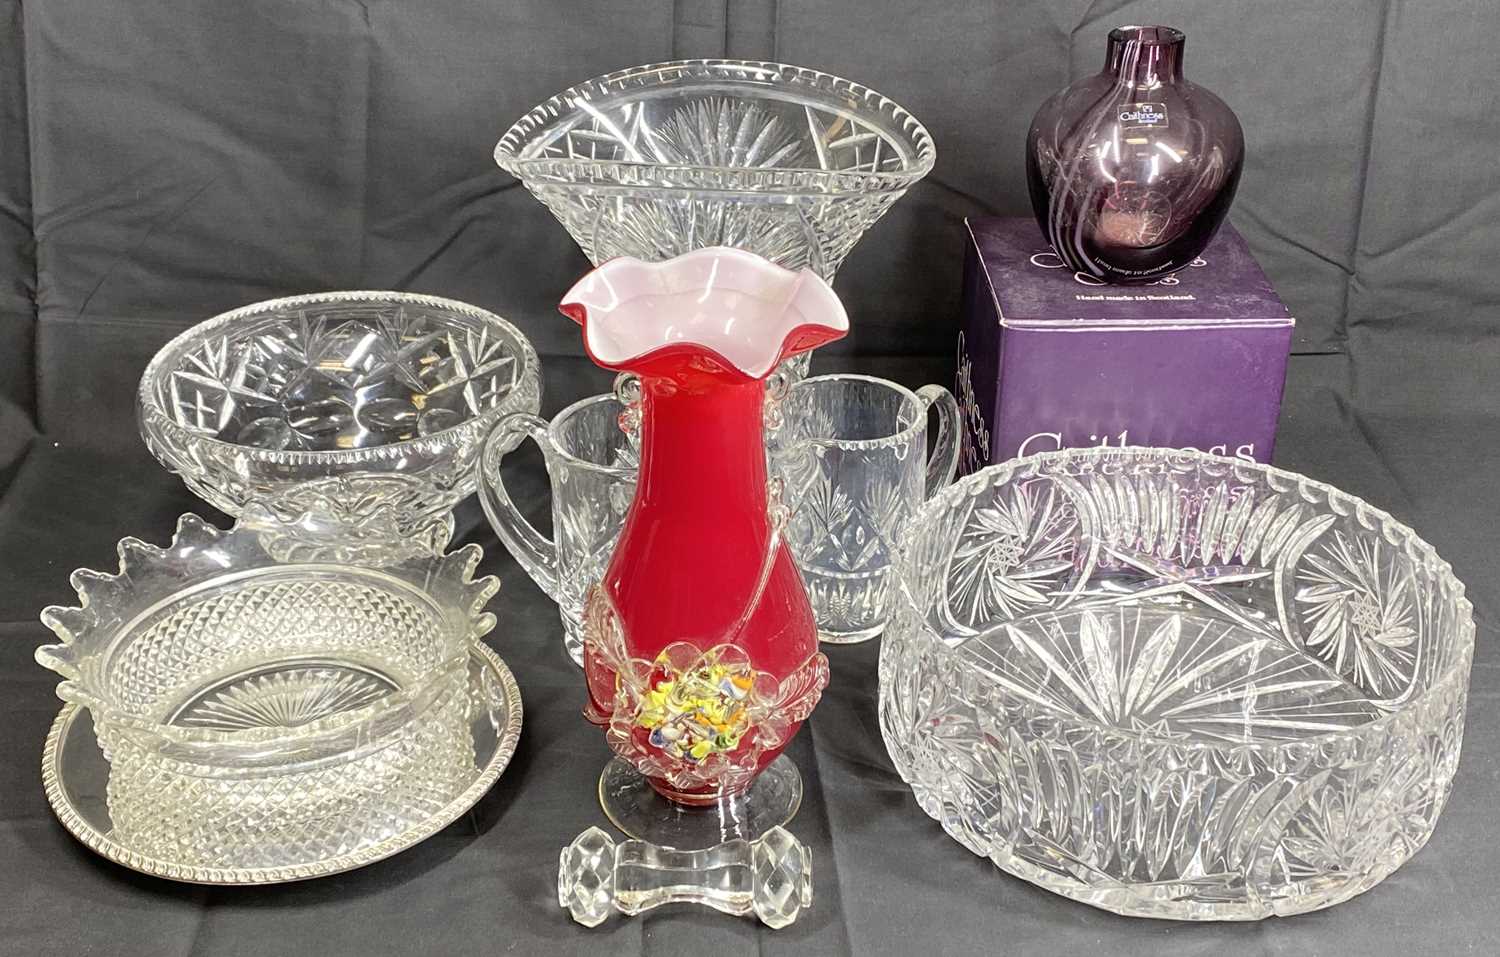 GOOD QUALITY HEAVY GLASSWARE, A PARCEL - including a large vase and two fruit basins, ETC - Image 2 of 2